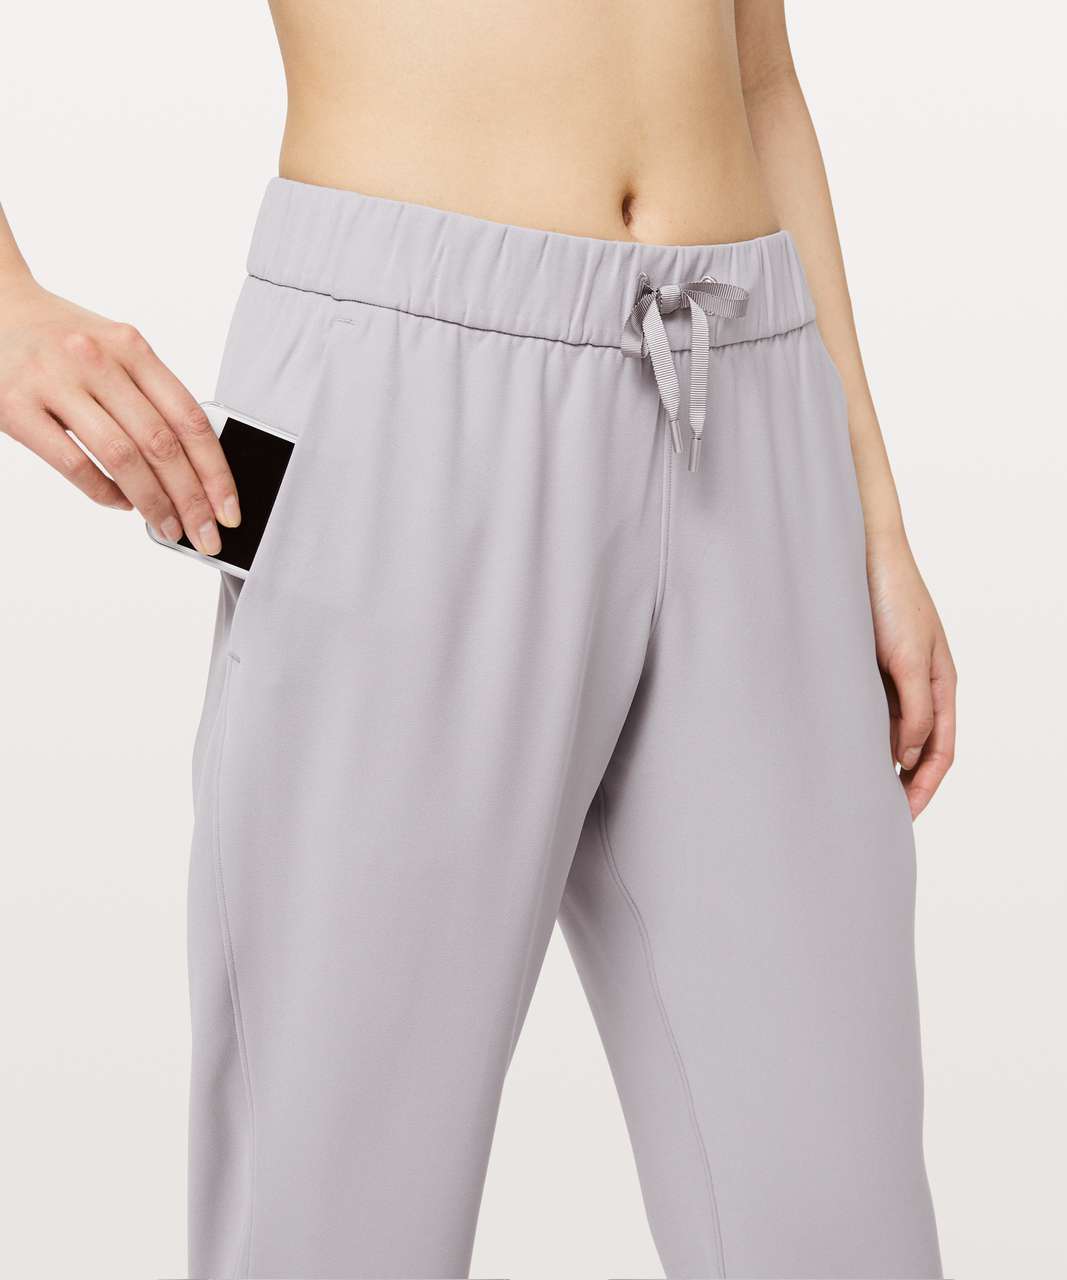 Lululemon On the Fly Jogger Pants Silver Screen Size 2 Womens